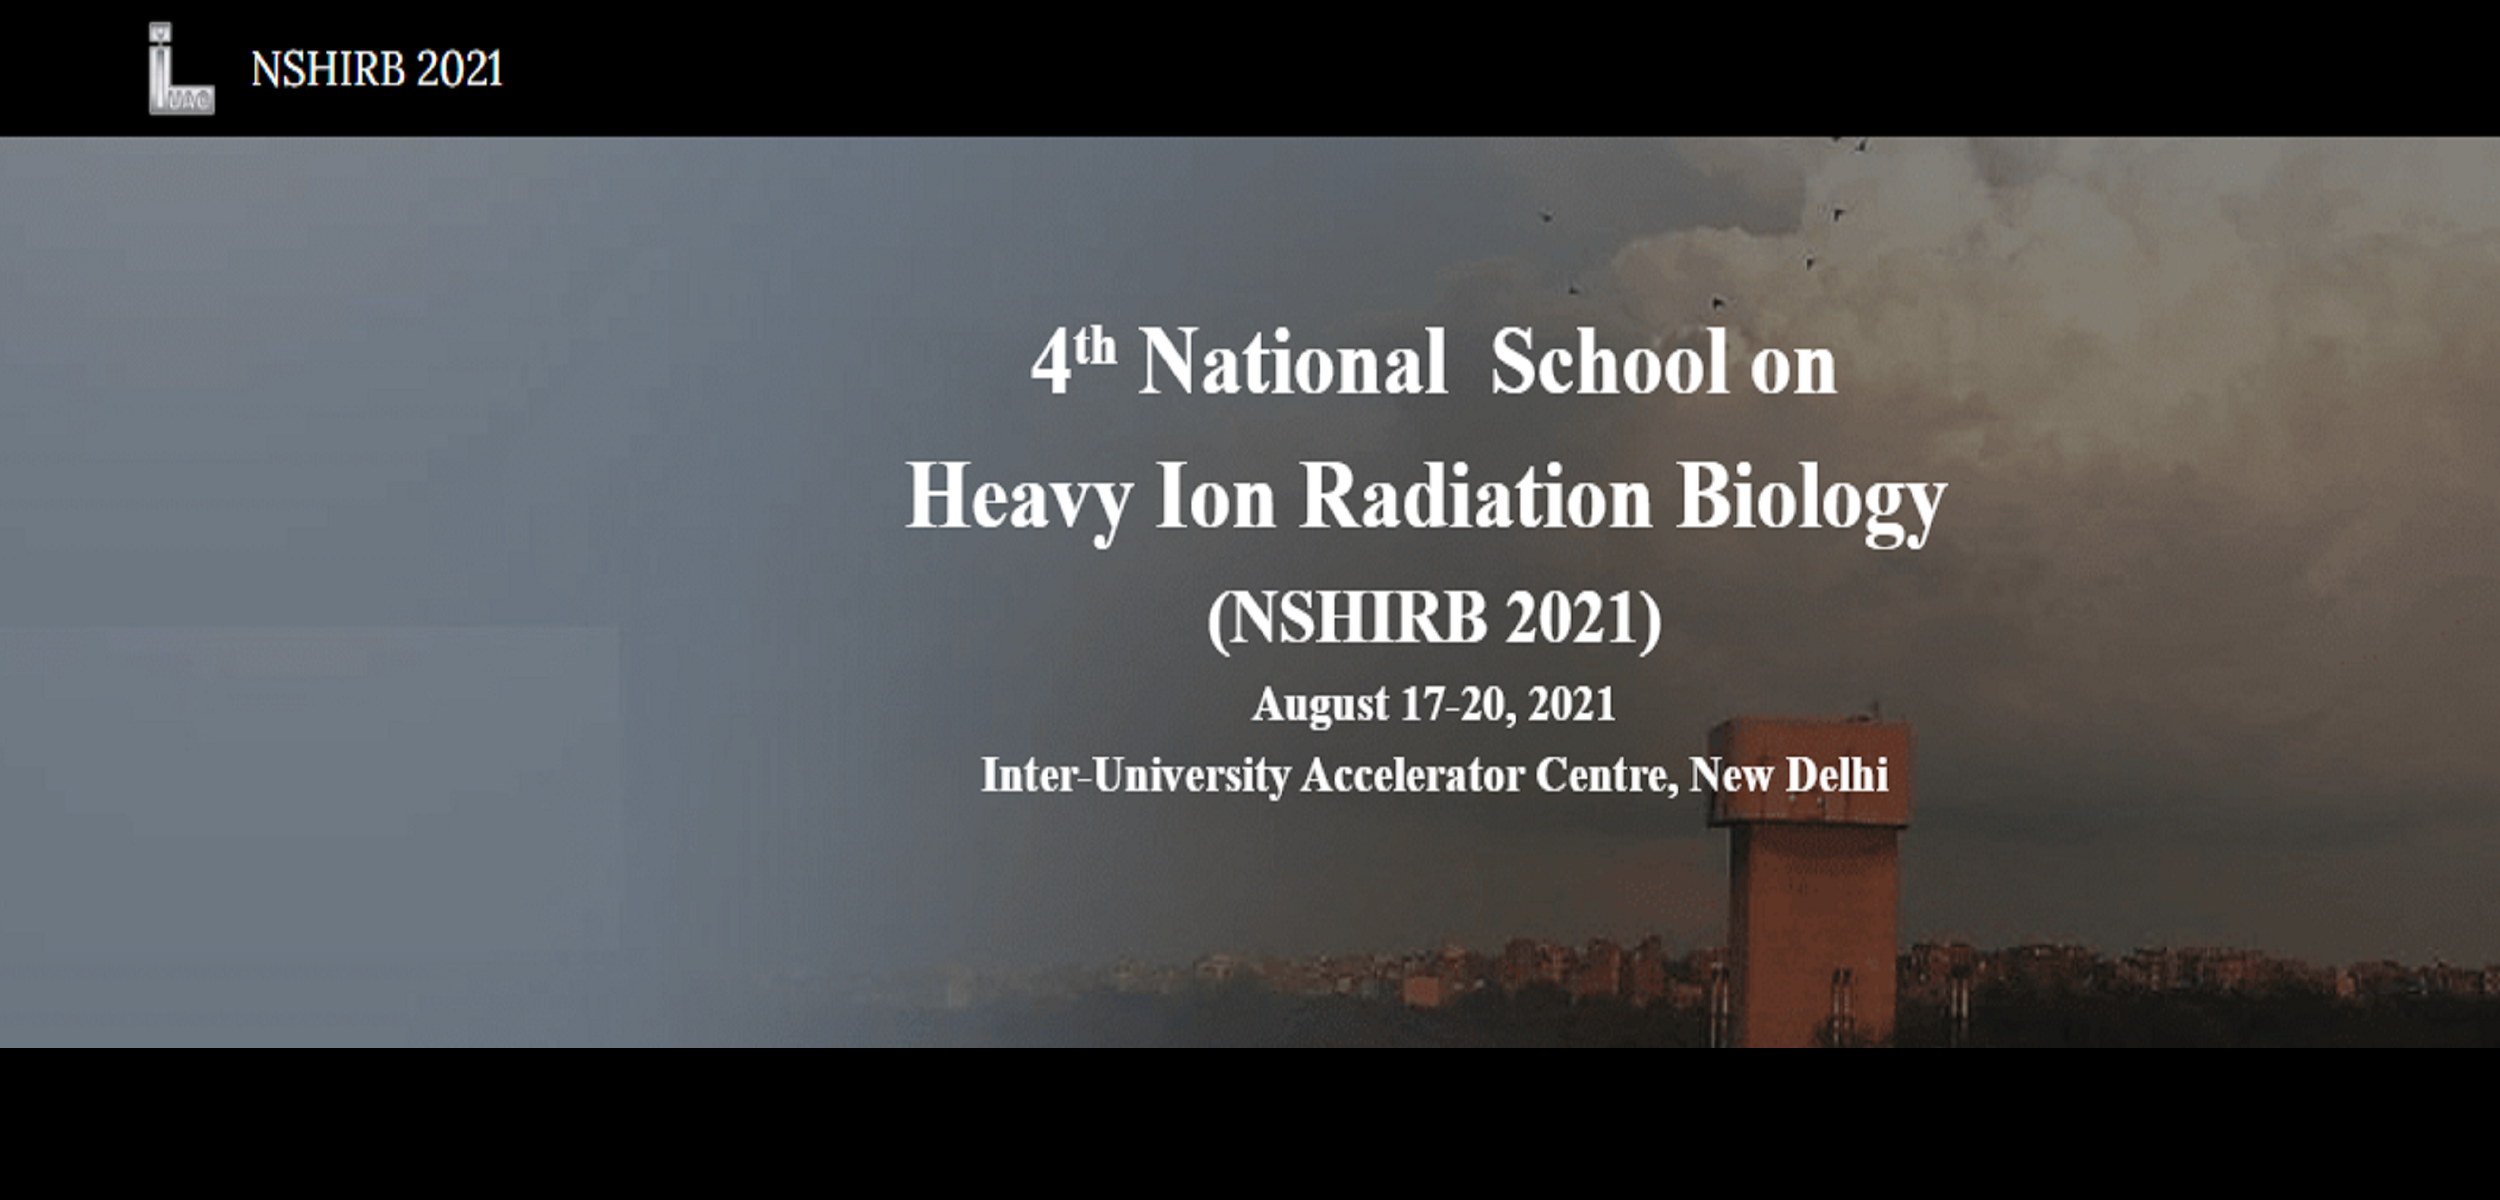 4th National School on Heavy Ion Radiation Biology from 17th to 20th August 2021